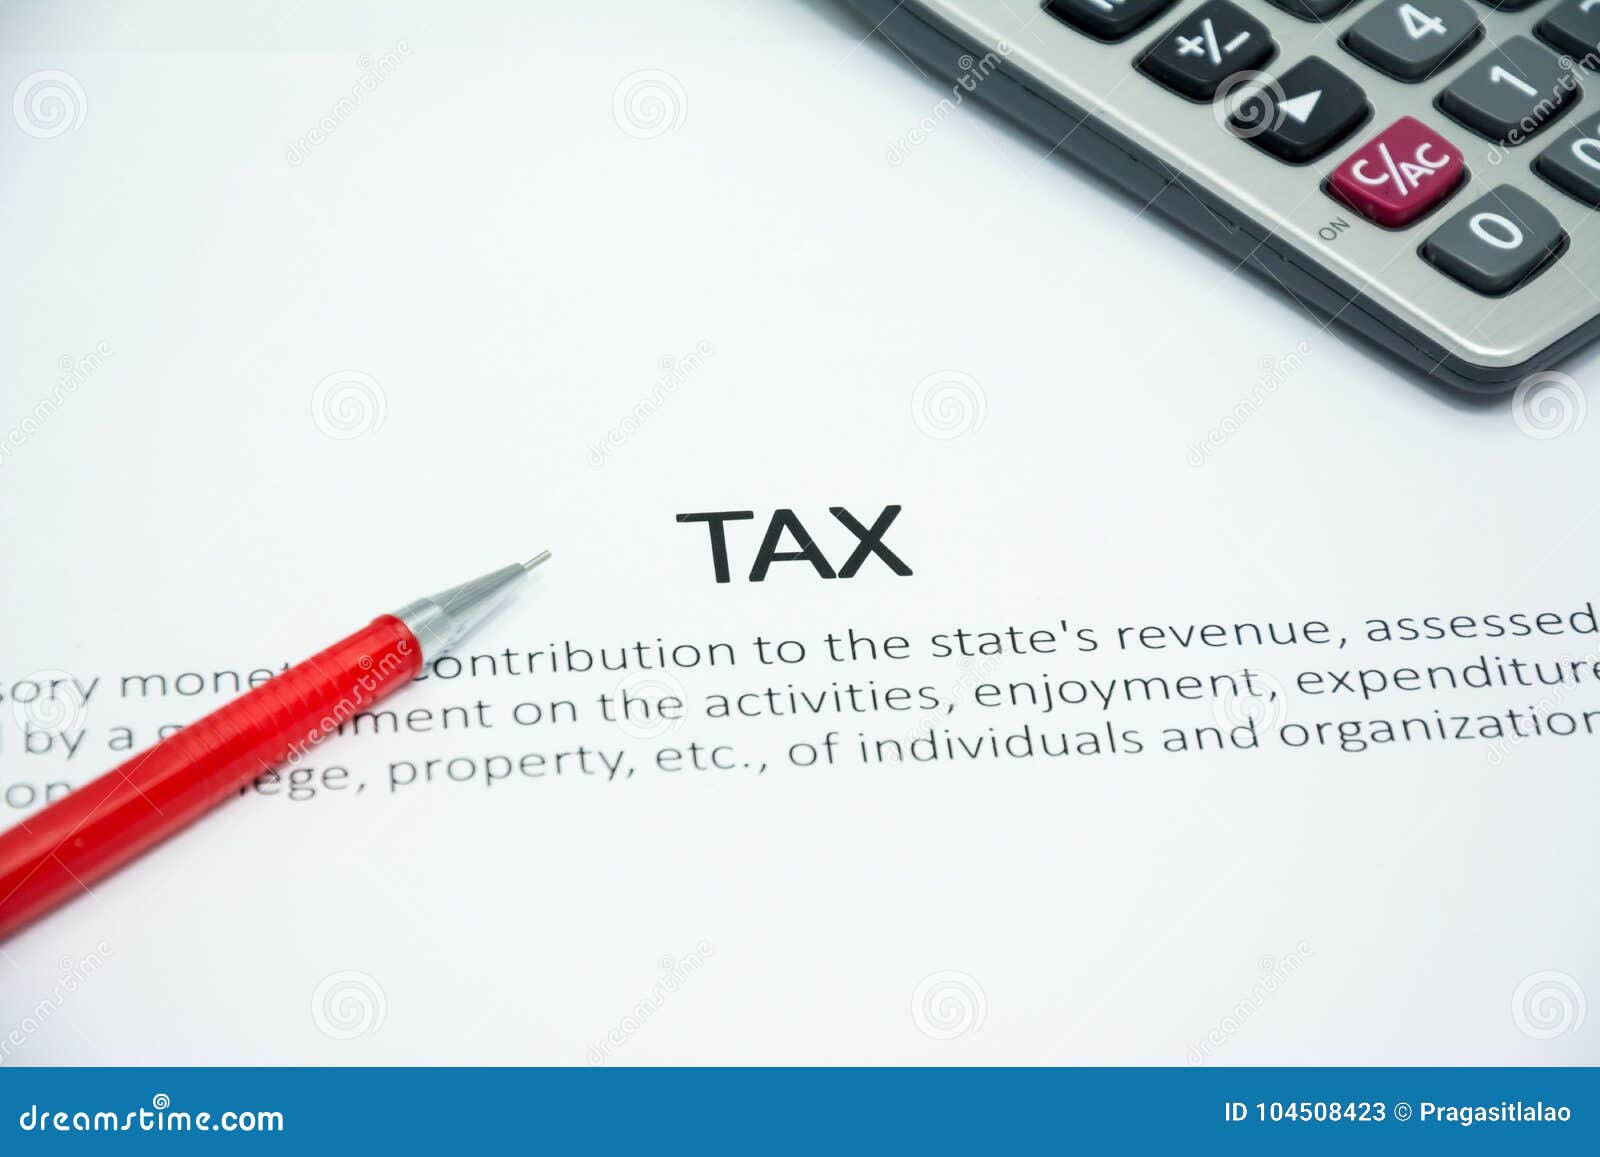 tax-meaning-word-with-pen-and-calculator-stock-image-image-of